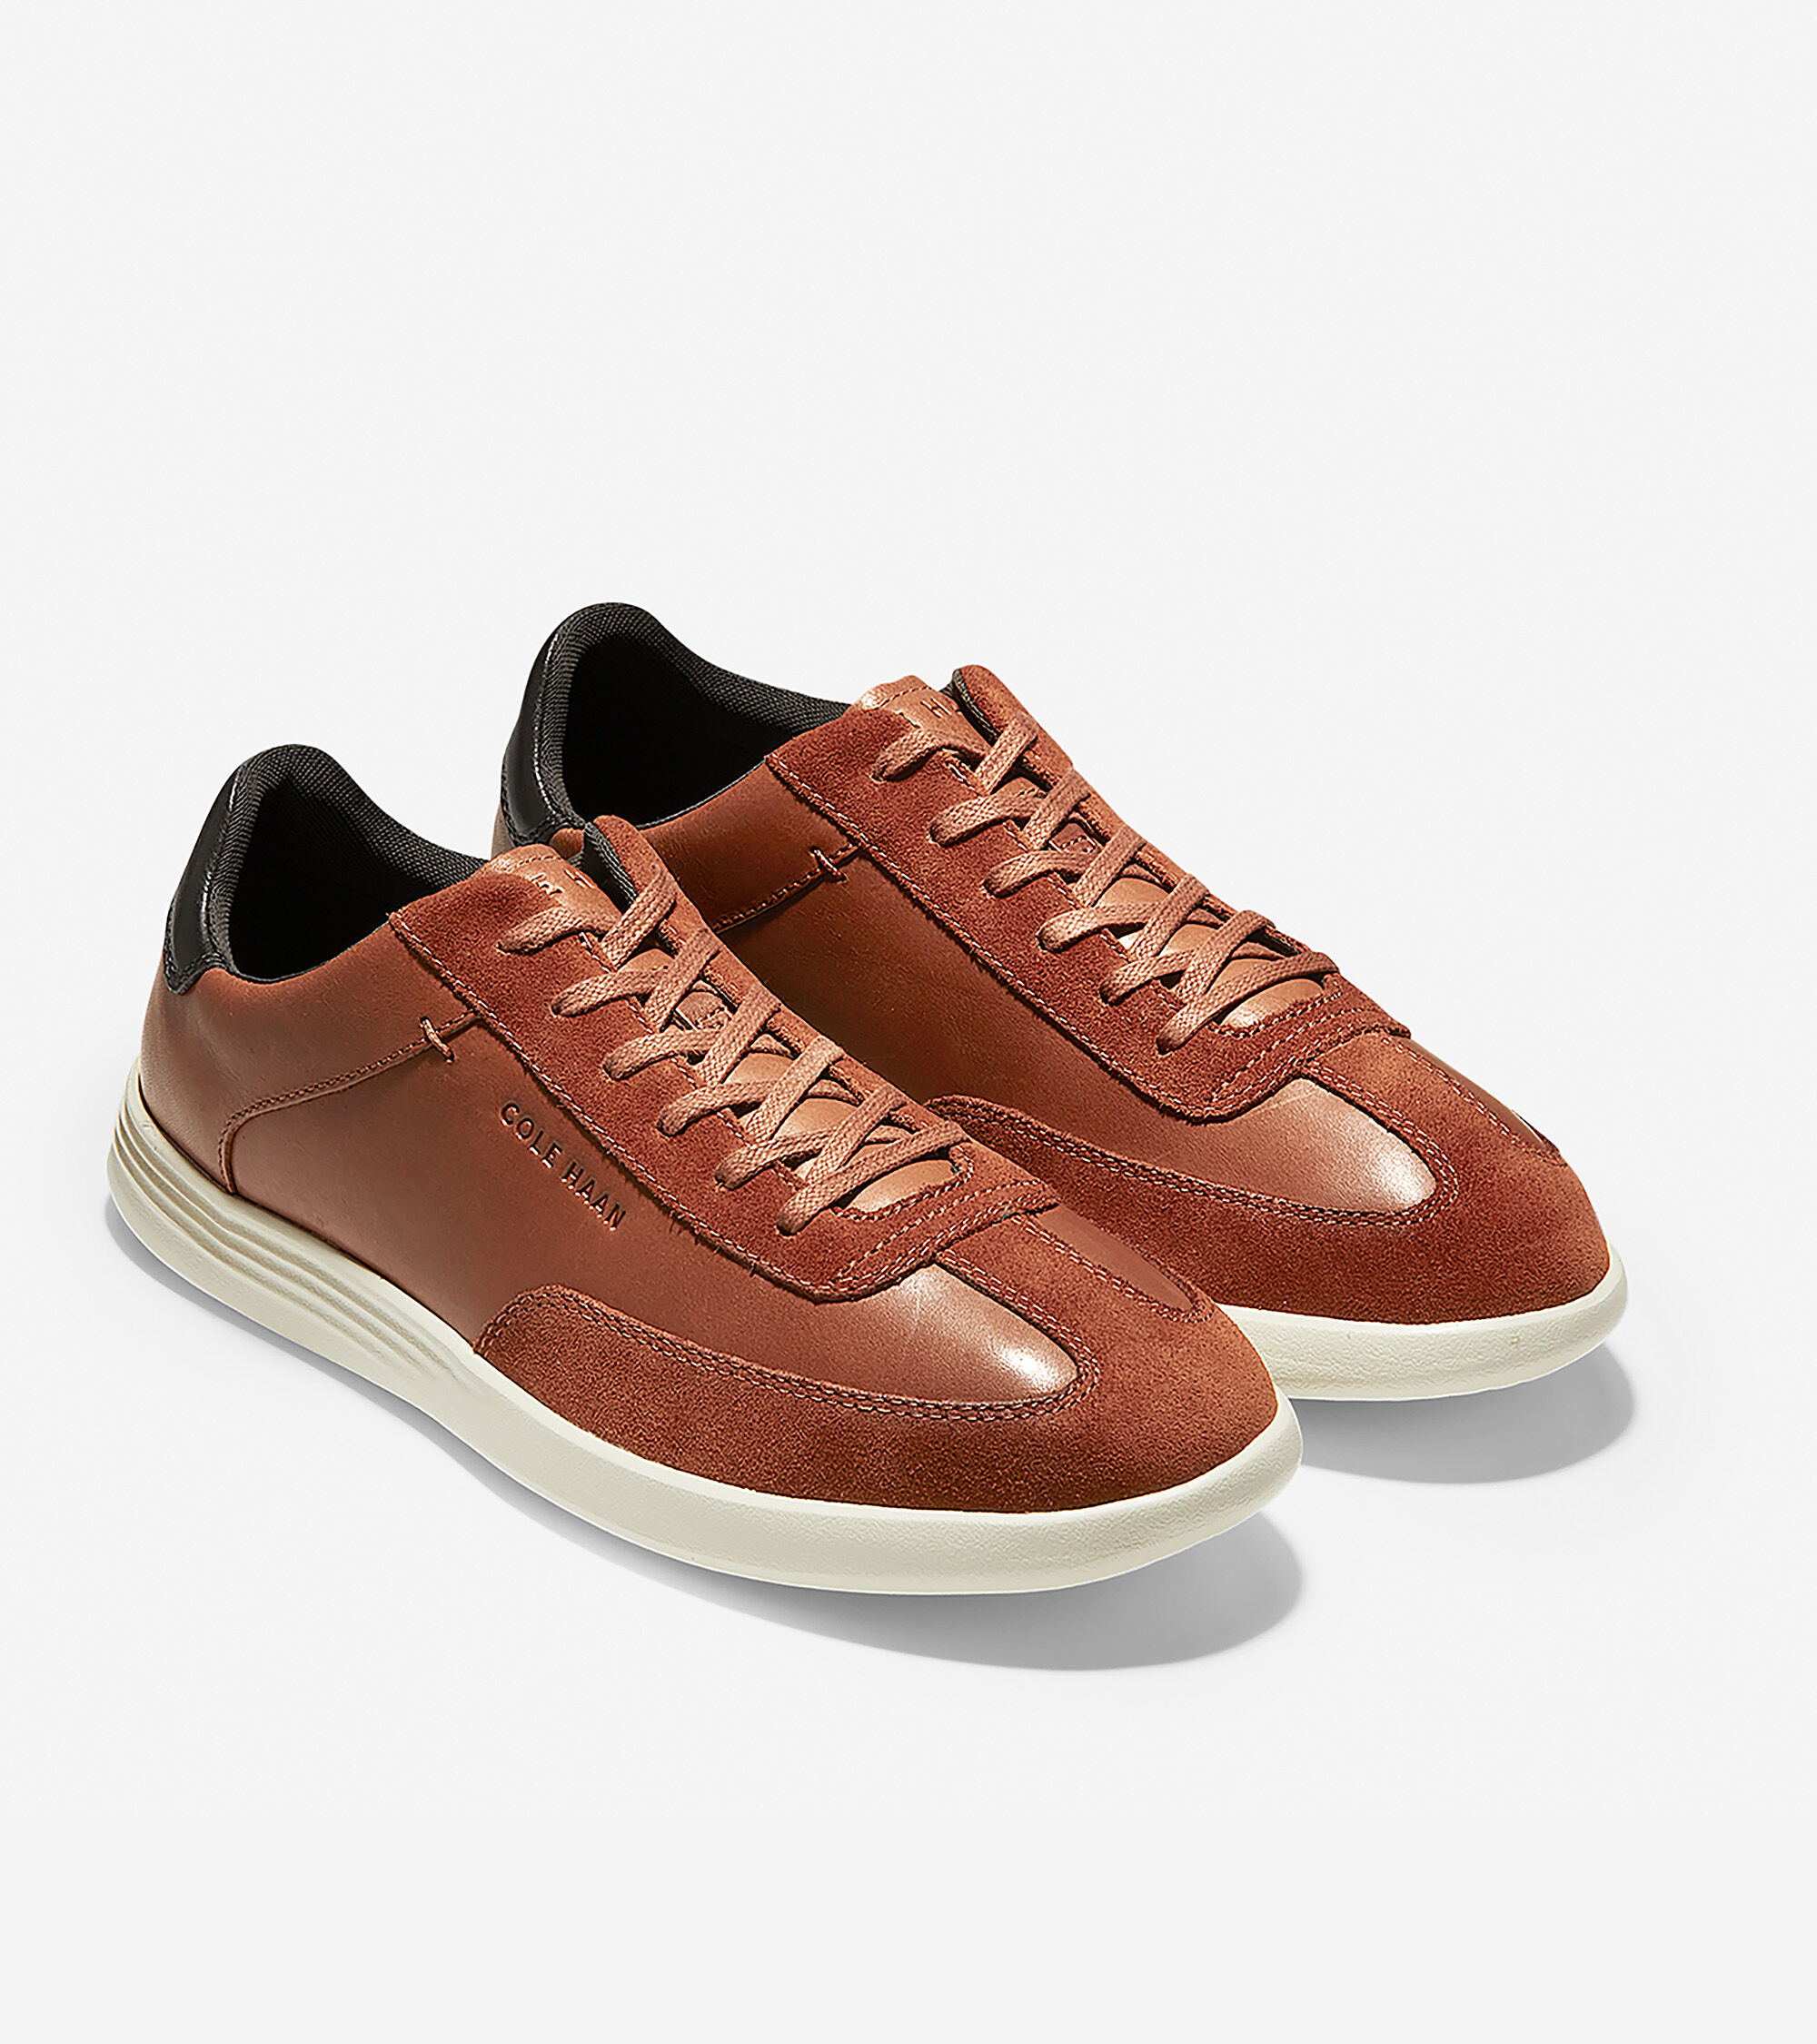 British Tan Leather-suede 